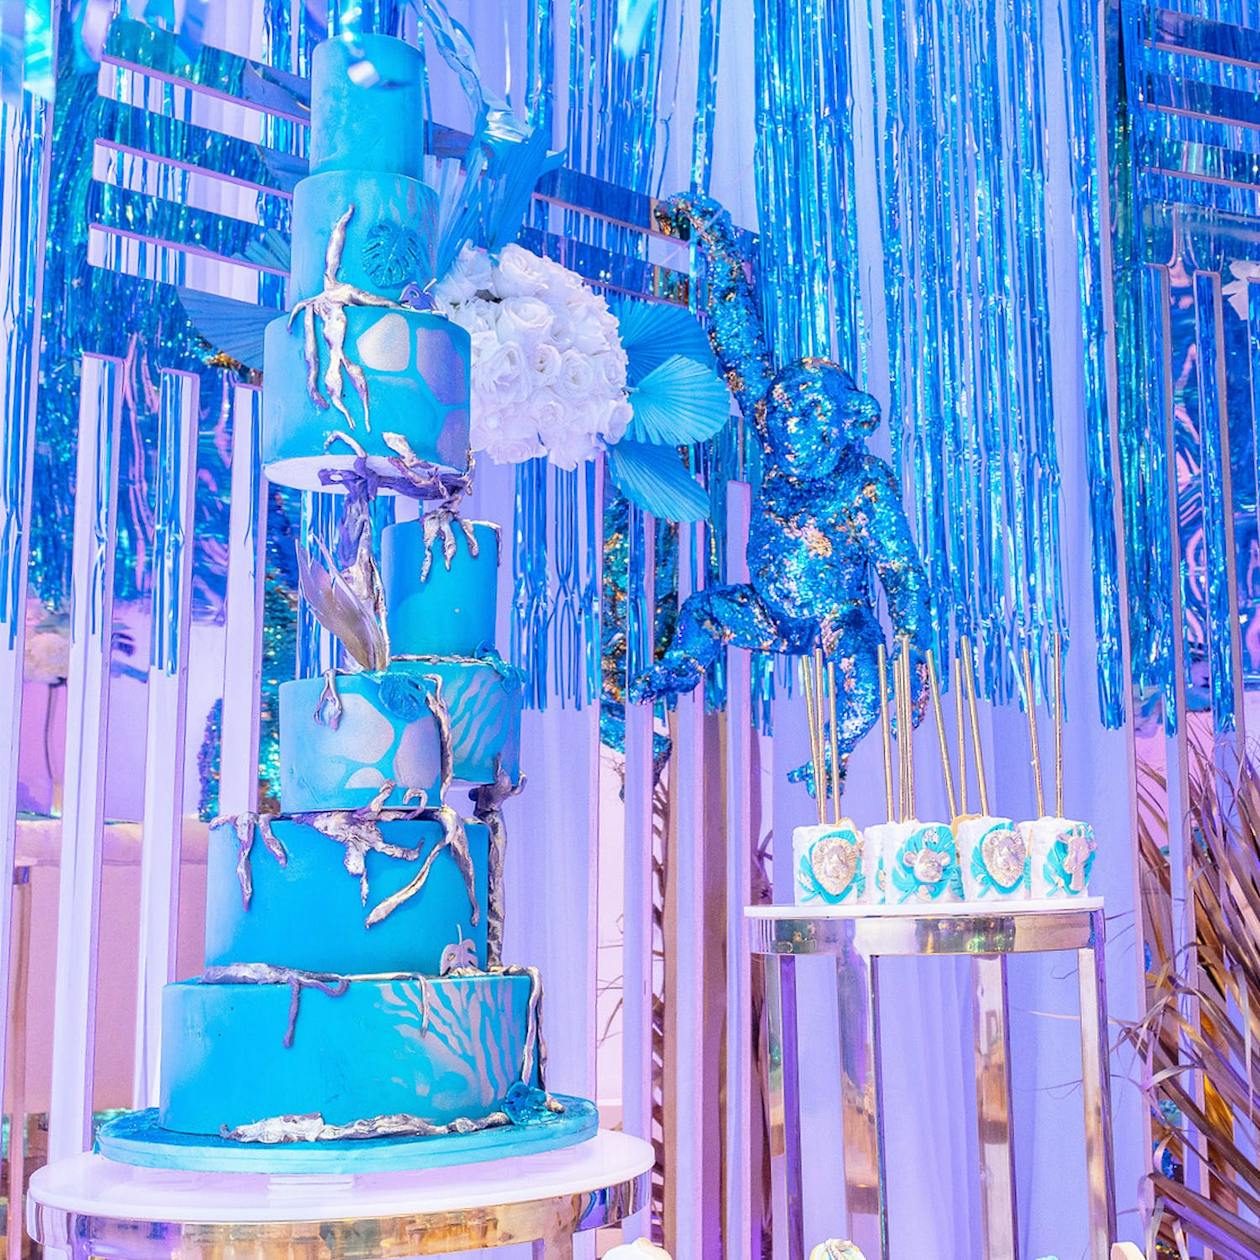 Towering blue cake with silver icing against iridescent blue fringe backdrop | PartySlate